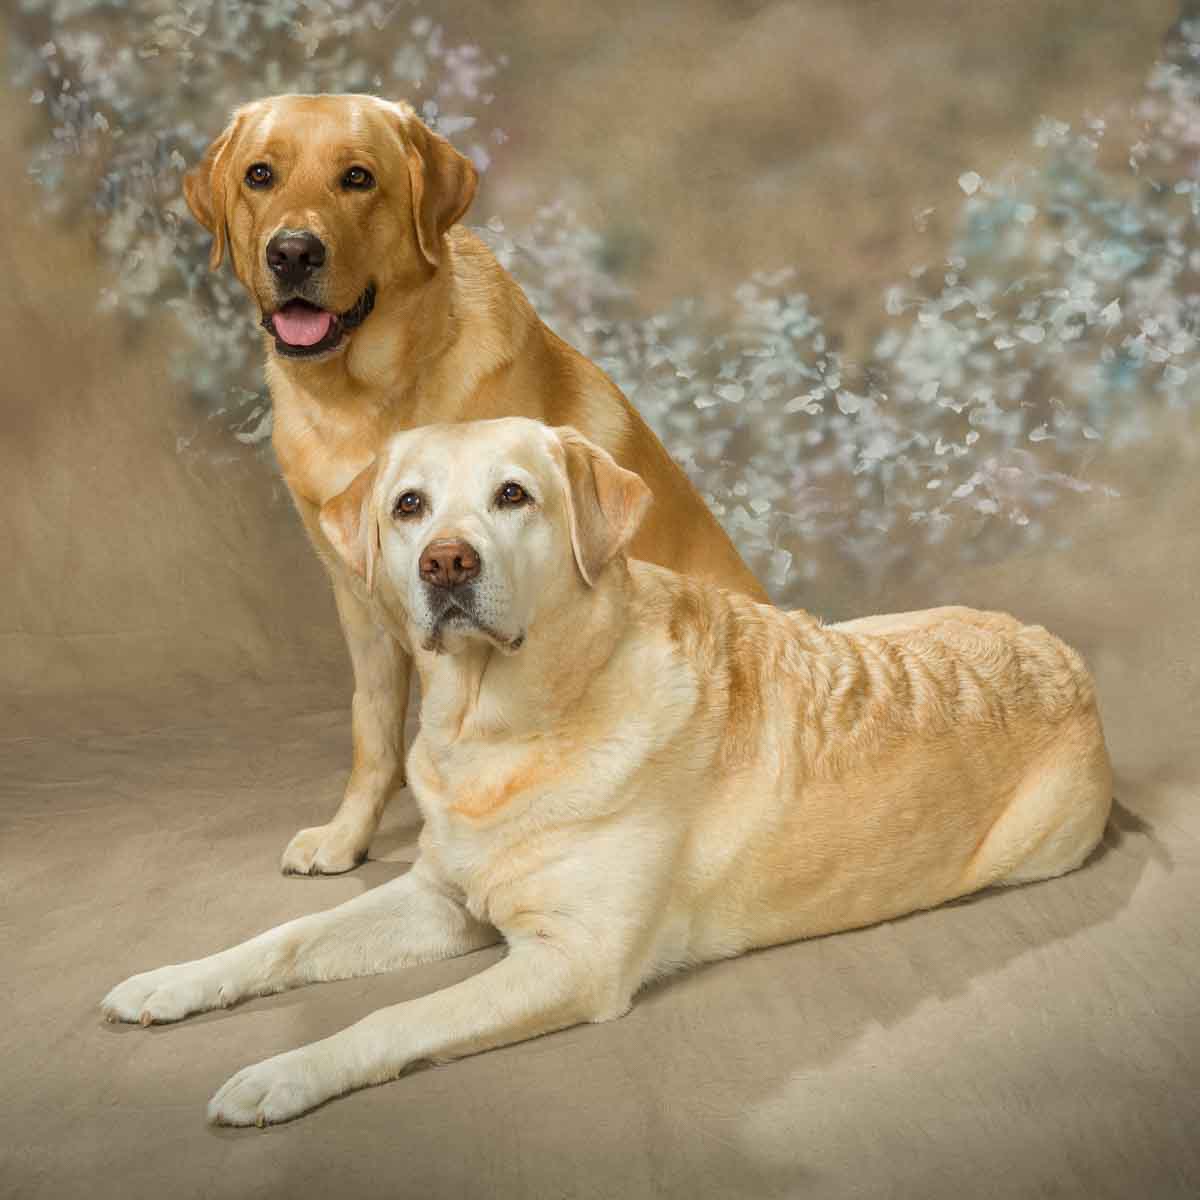 Two dogs sitting on the ground in a room.